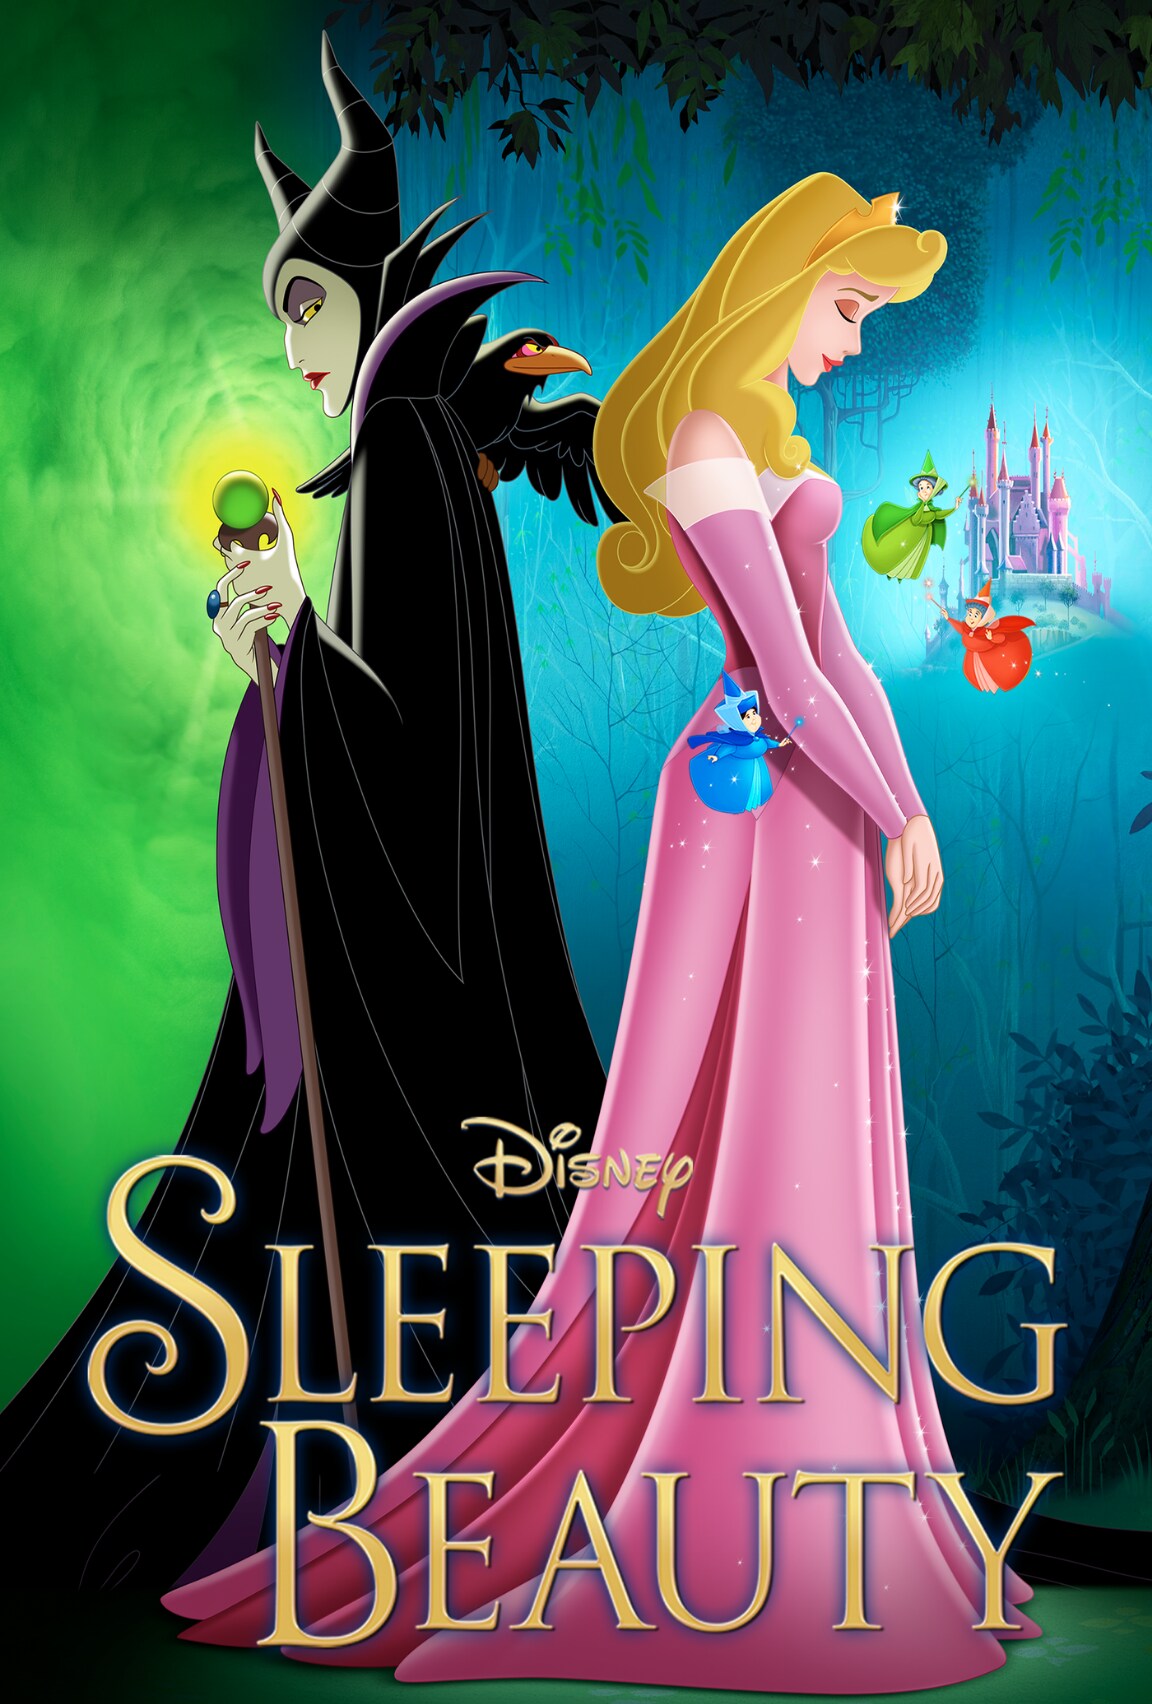 Disney Holds The Crown When It Comes To Epic Tales Of Queens And